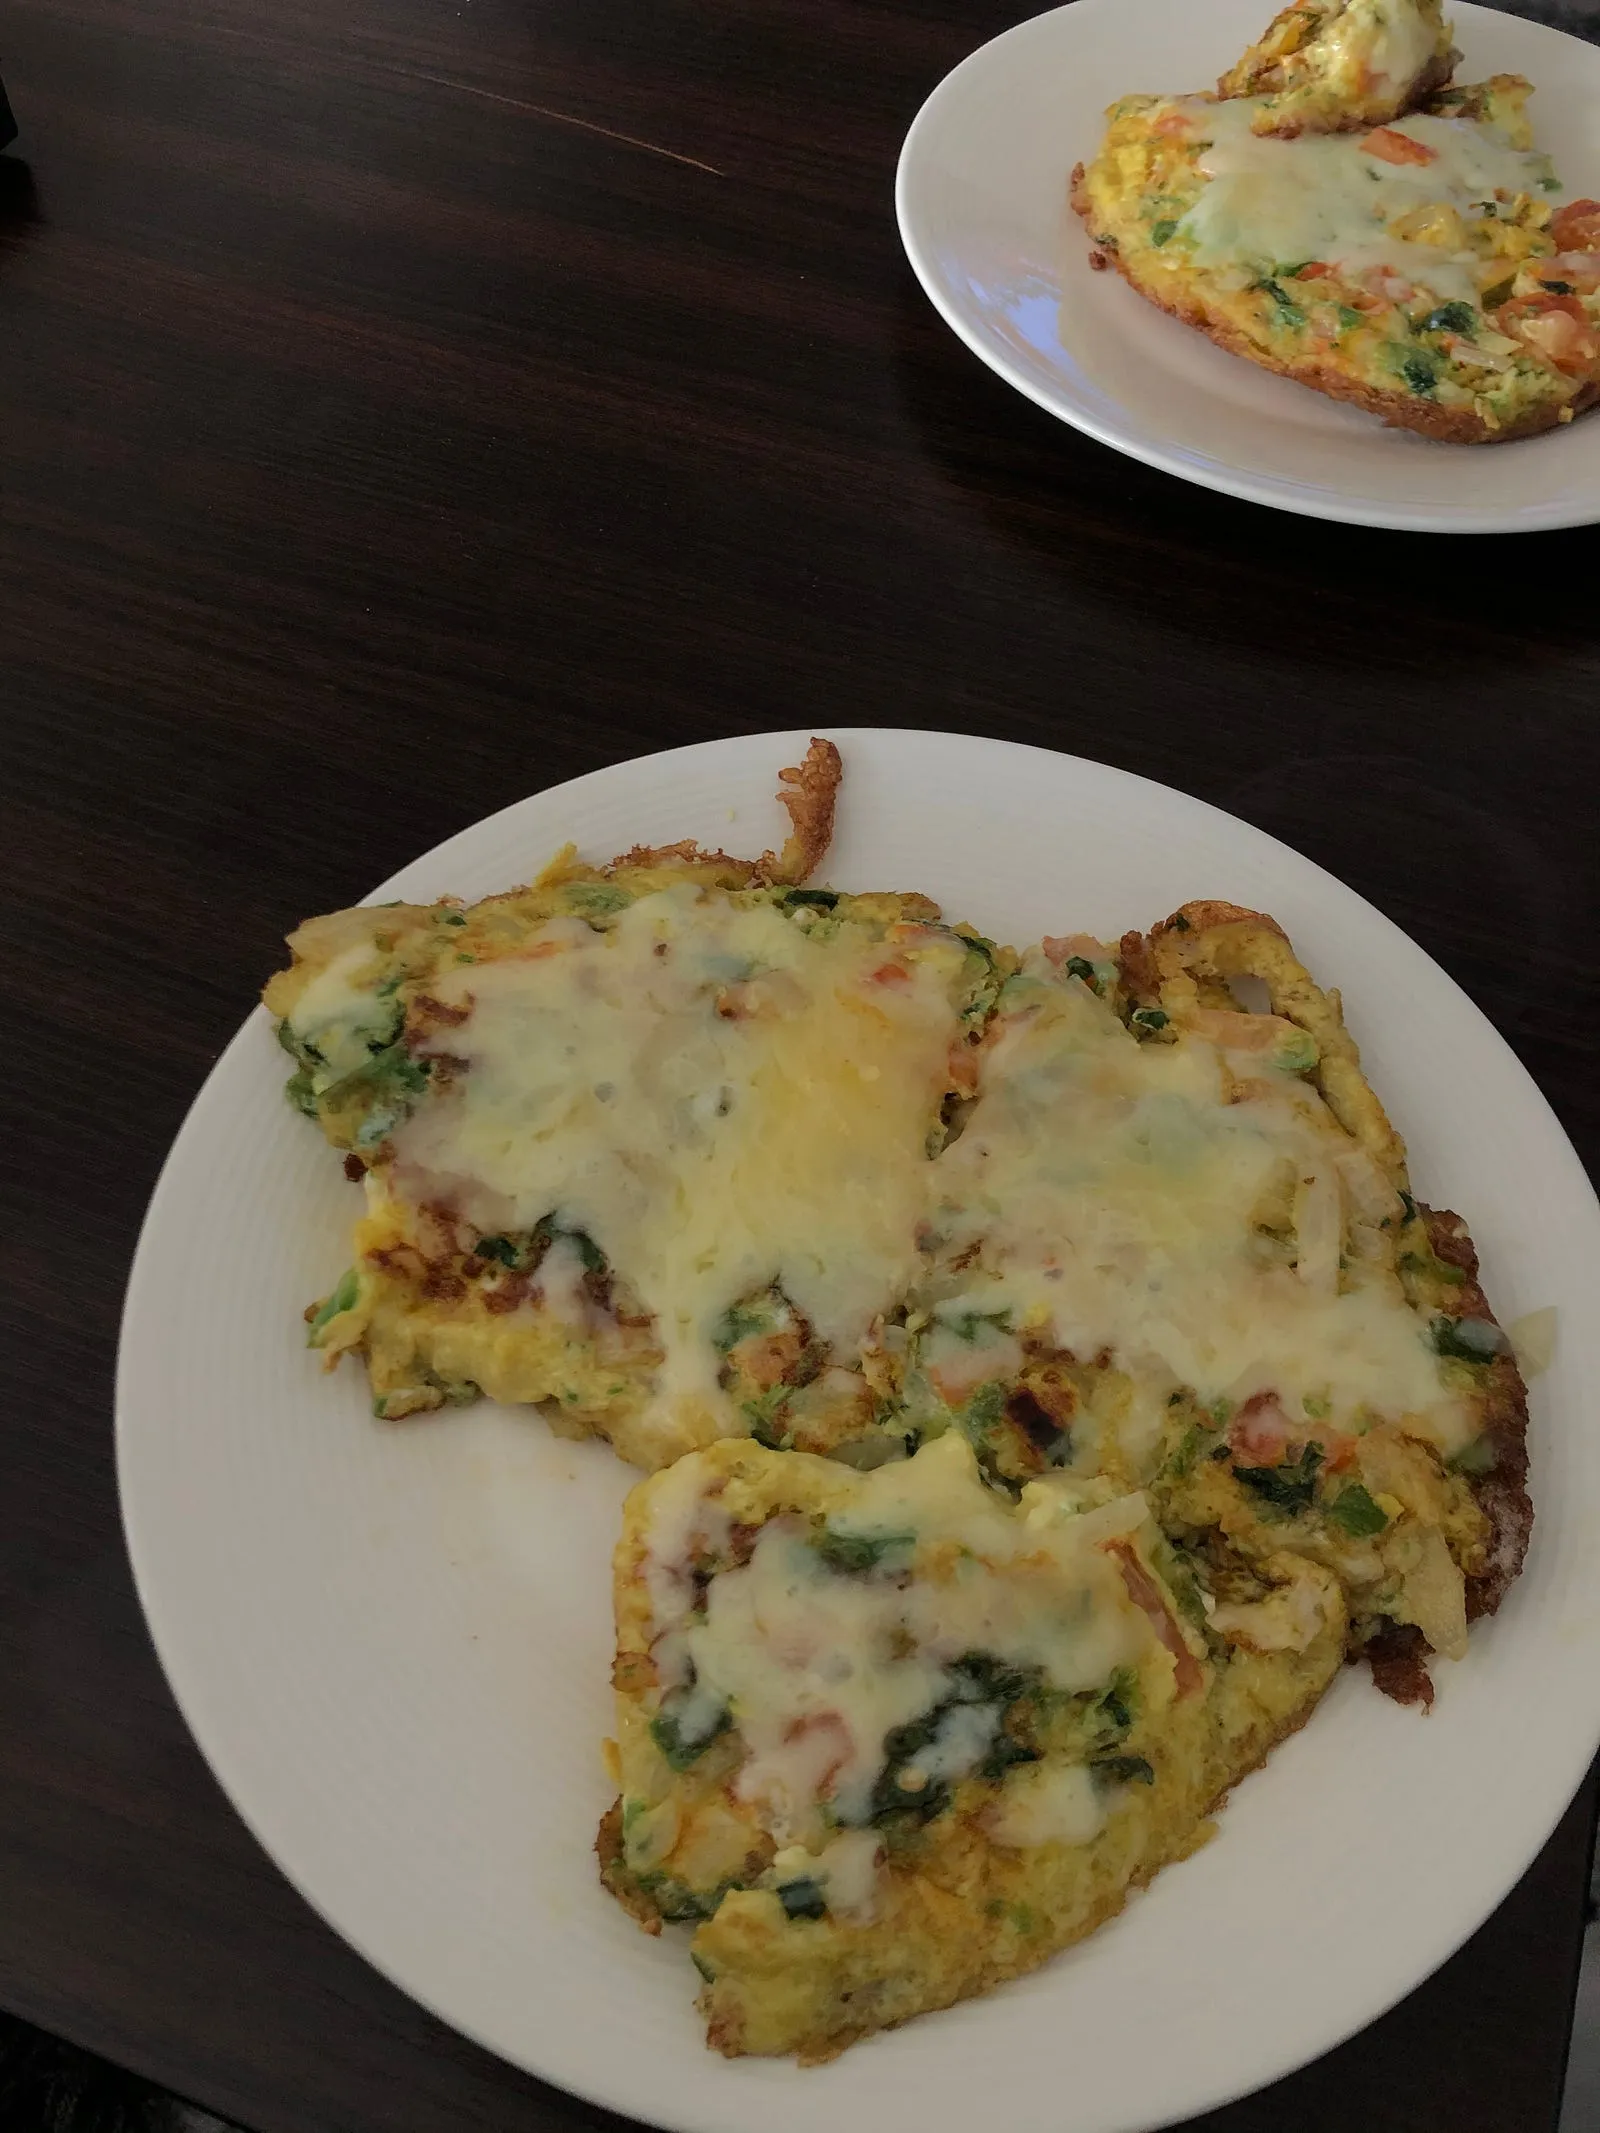 Spinach cheese omelette